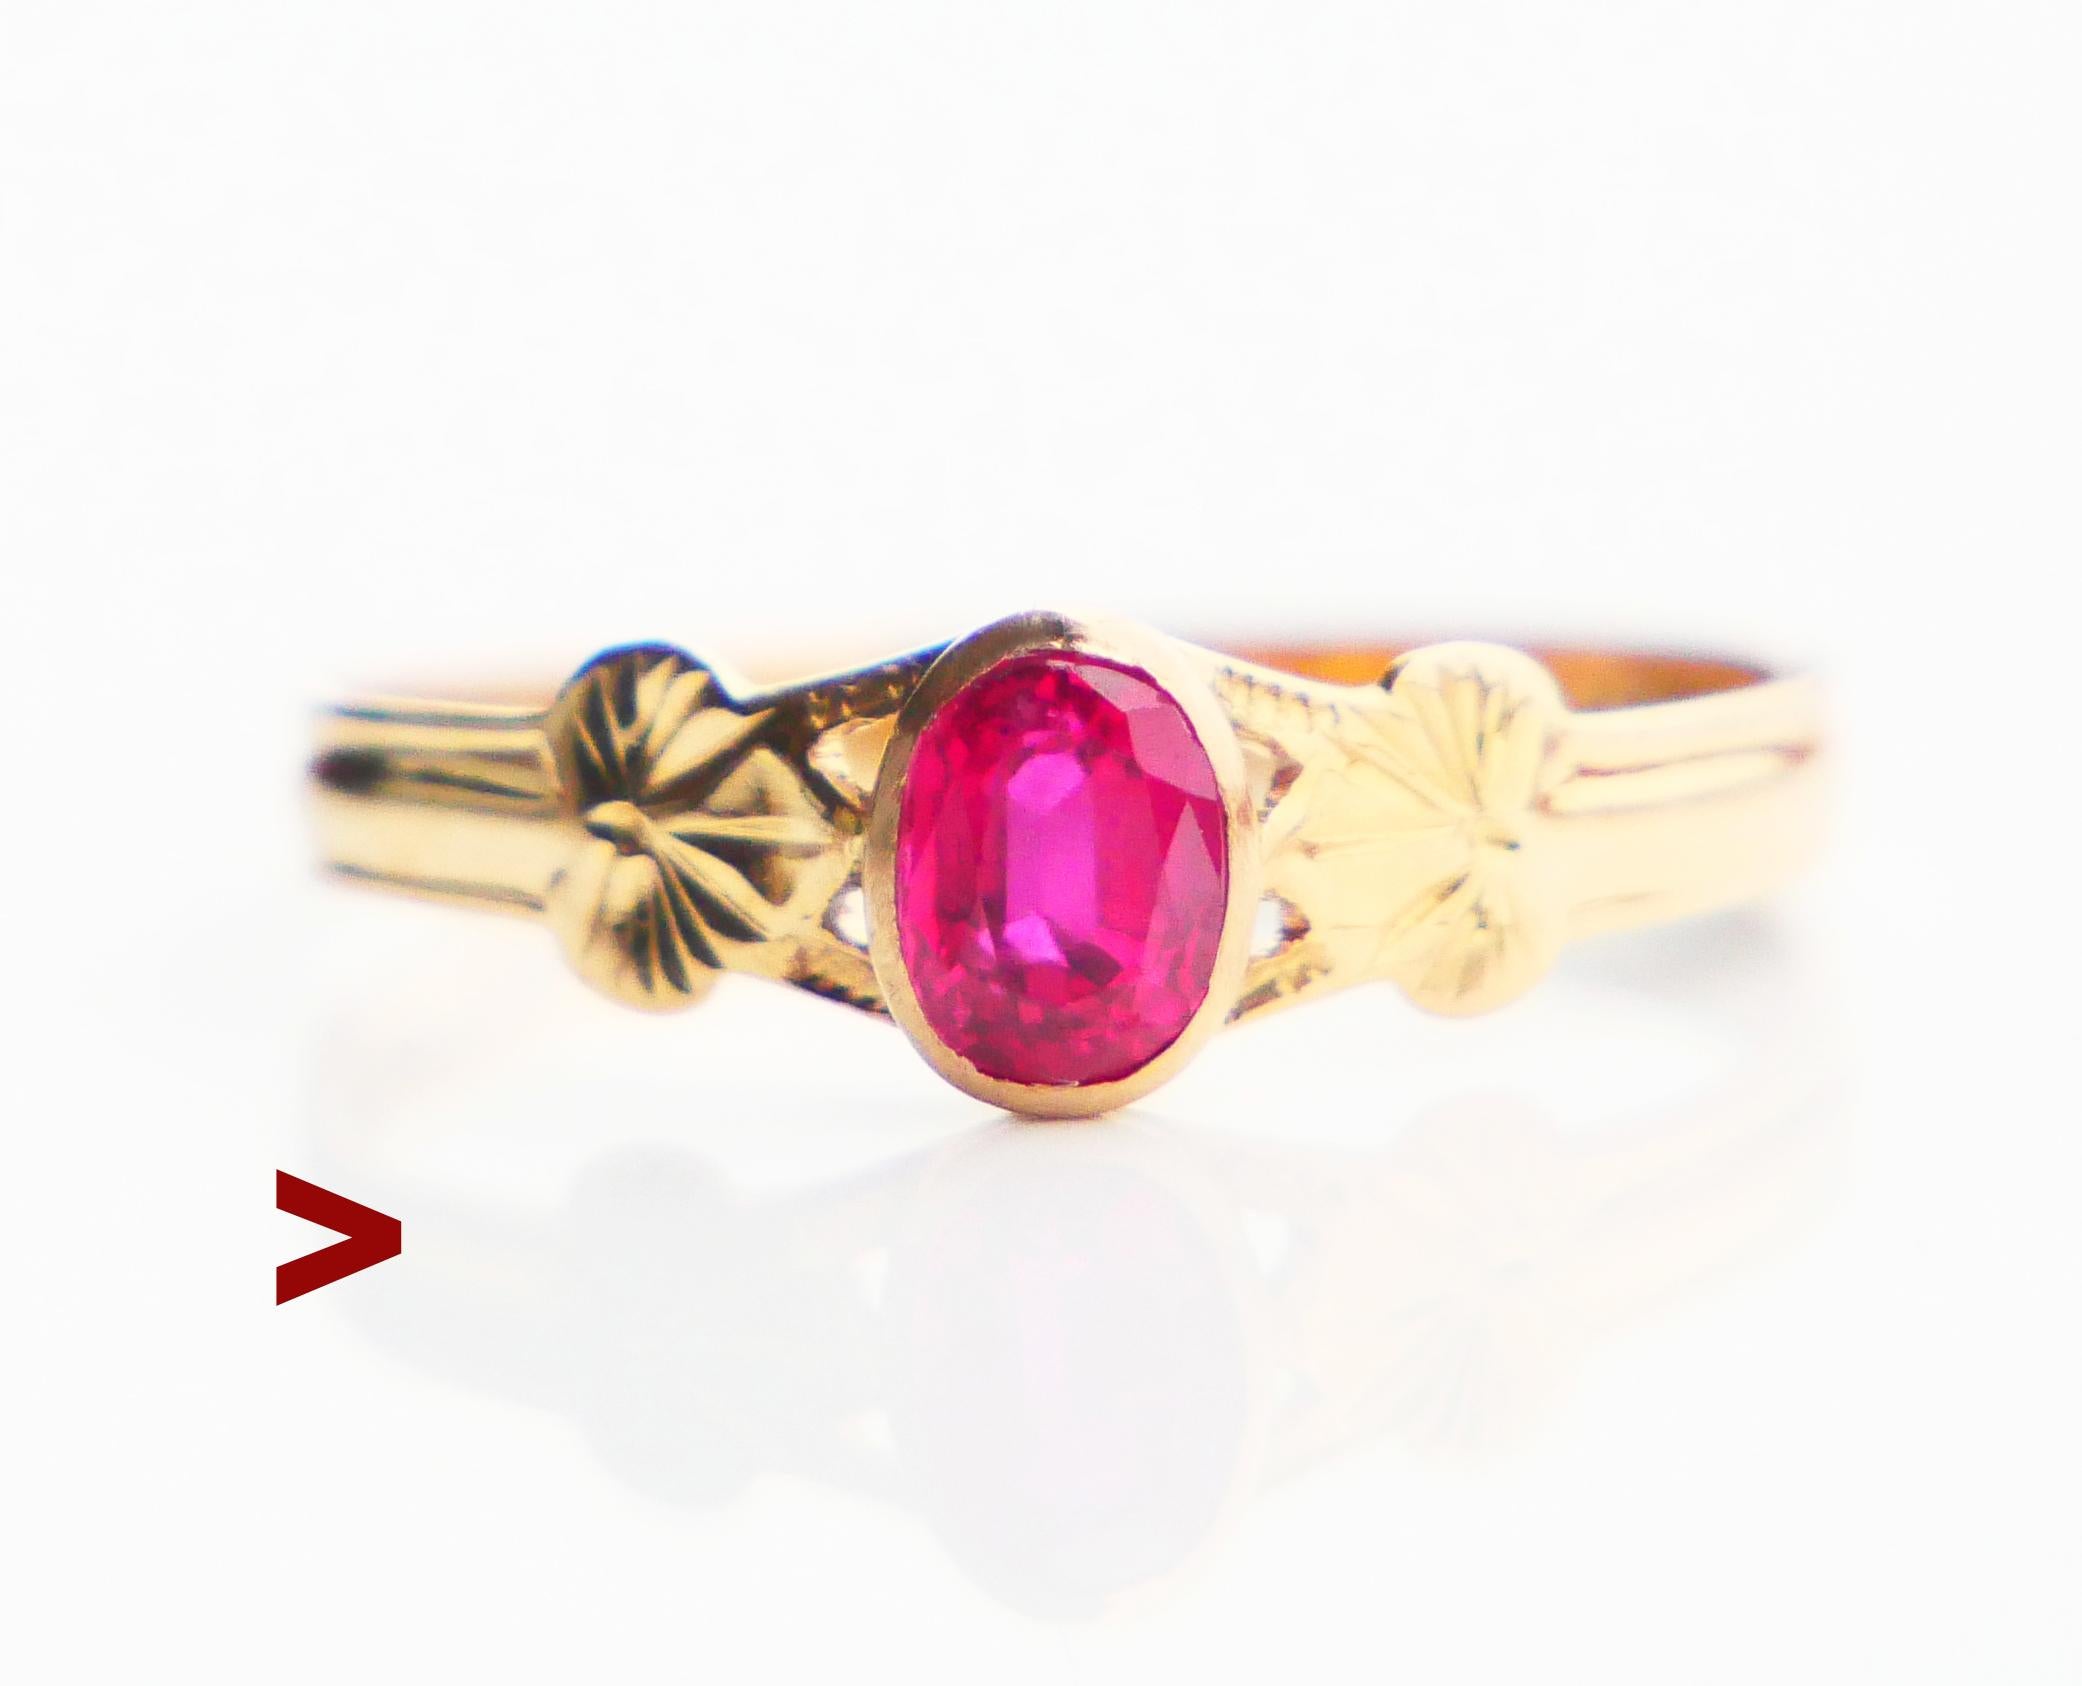 A Ring from distant Art- Deco period, engraved band in solid 18K Yellow Gold with bezel set oval cut natural Red Ruby 5 mm x 4 mm / ca. 0.5 ct. Stone has internal inclusions.

Hallmarked 18K ,maker is GD&Co , year combination S7 / made in Sweden in